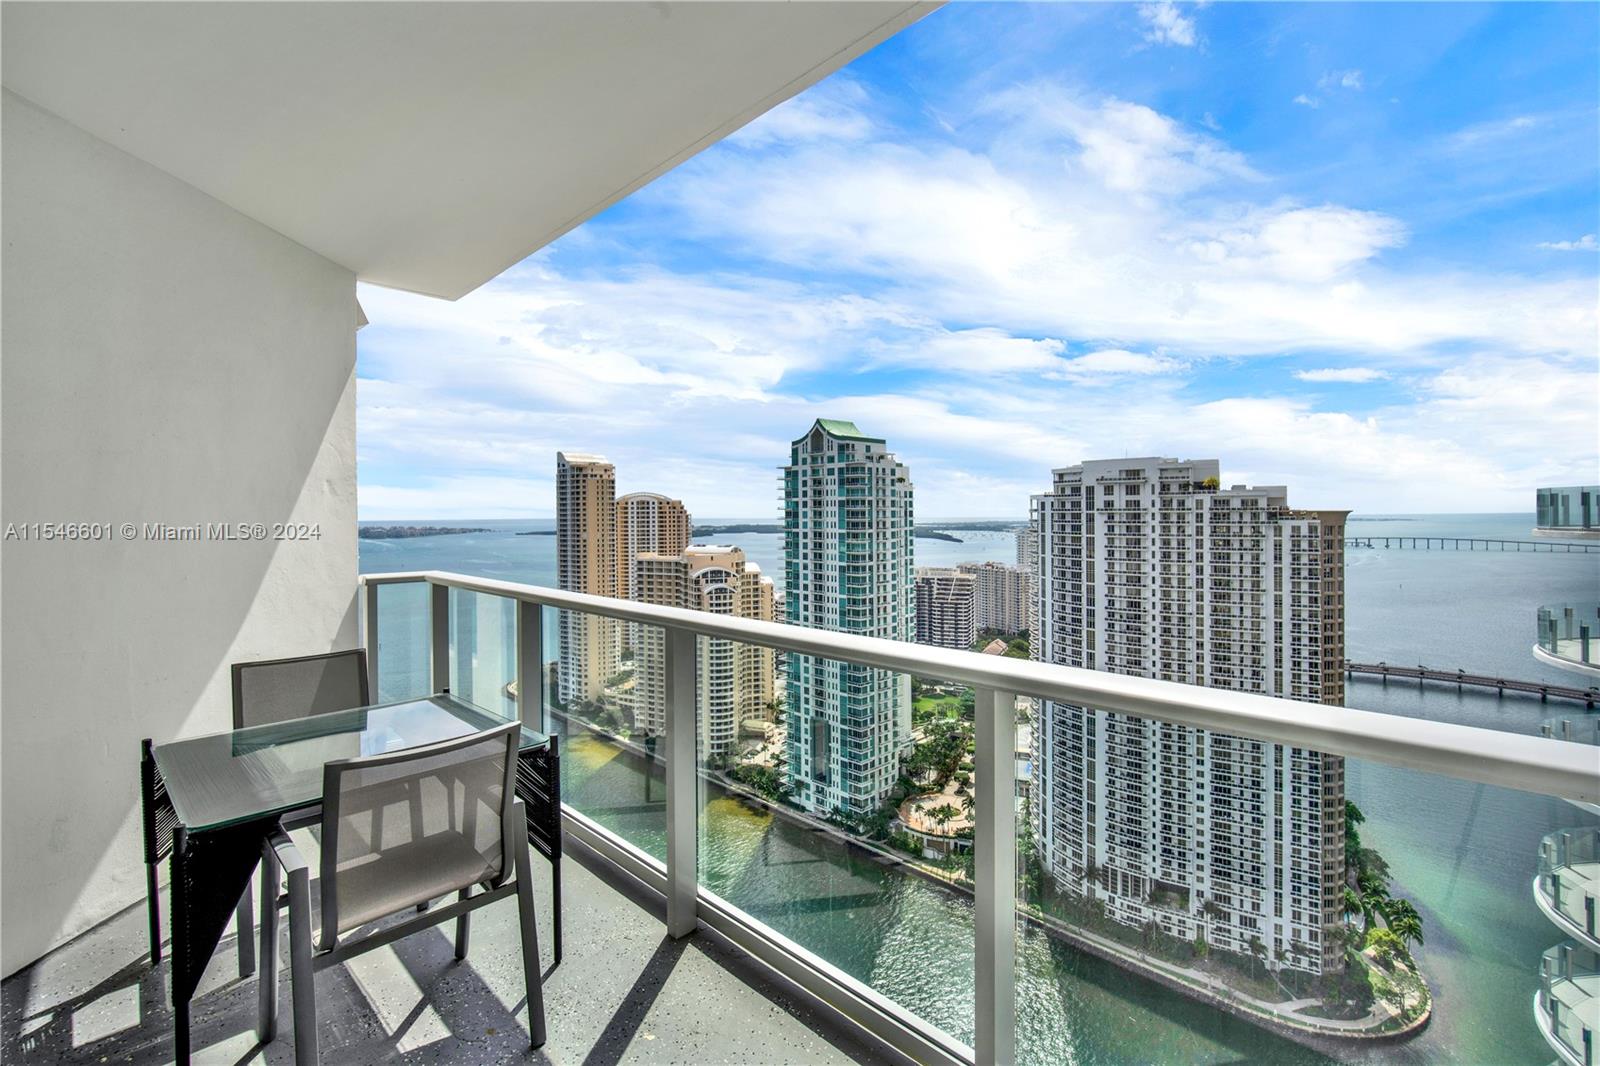 Welcome to one of the most famous locations in Miami! Discover Miami Downtown/Brickell lifestyle with close distance to local restaurants, Bayfront Park, Whole Foods, and Metromover station  is just one block away. And of course, become a neighbour of iconic Aston Martin Residences! Enjoy stunning Bay Front & Brickell Key island view from your balcony every day. Beautiful 2/2 unit is in great condition; it was recently updated with window treatments in living room and main bedroom, new washer/dryer, upgraded AC components & thermostat, new oven hood and light fixtures.  Unit is furnished with new stylish furniture to make your moving process easy and fast! Basic cable & Internet is included plus 1 assigned parking space.